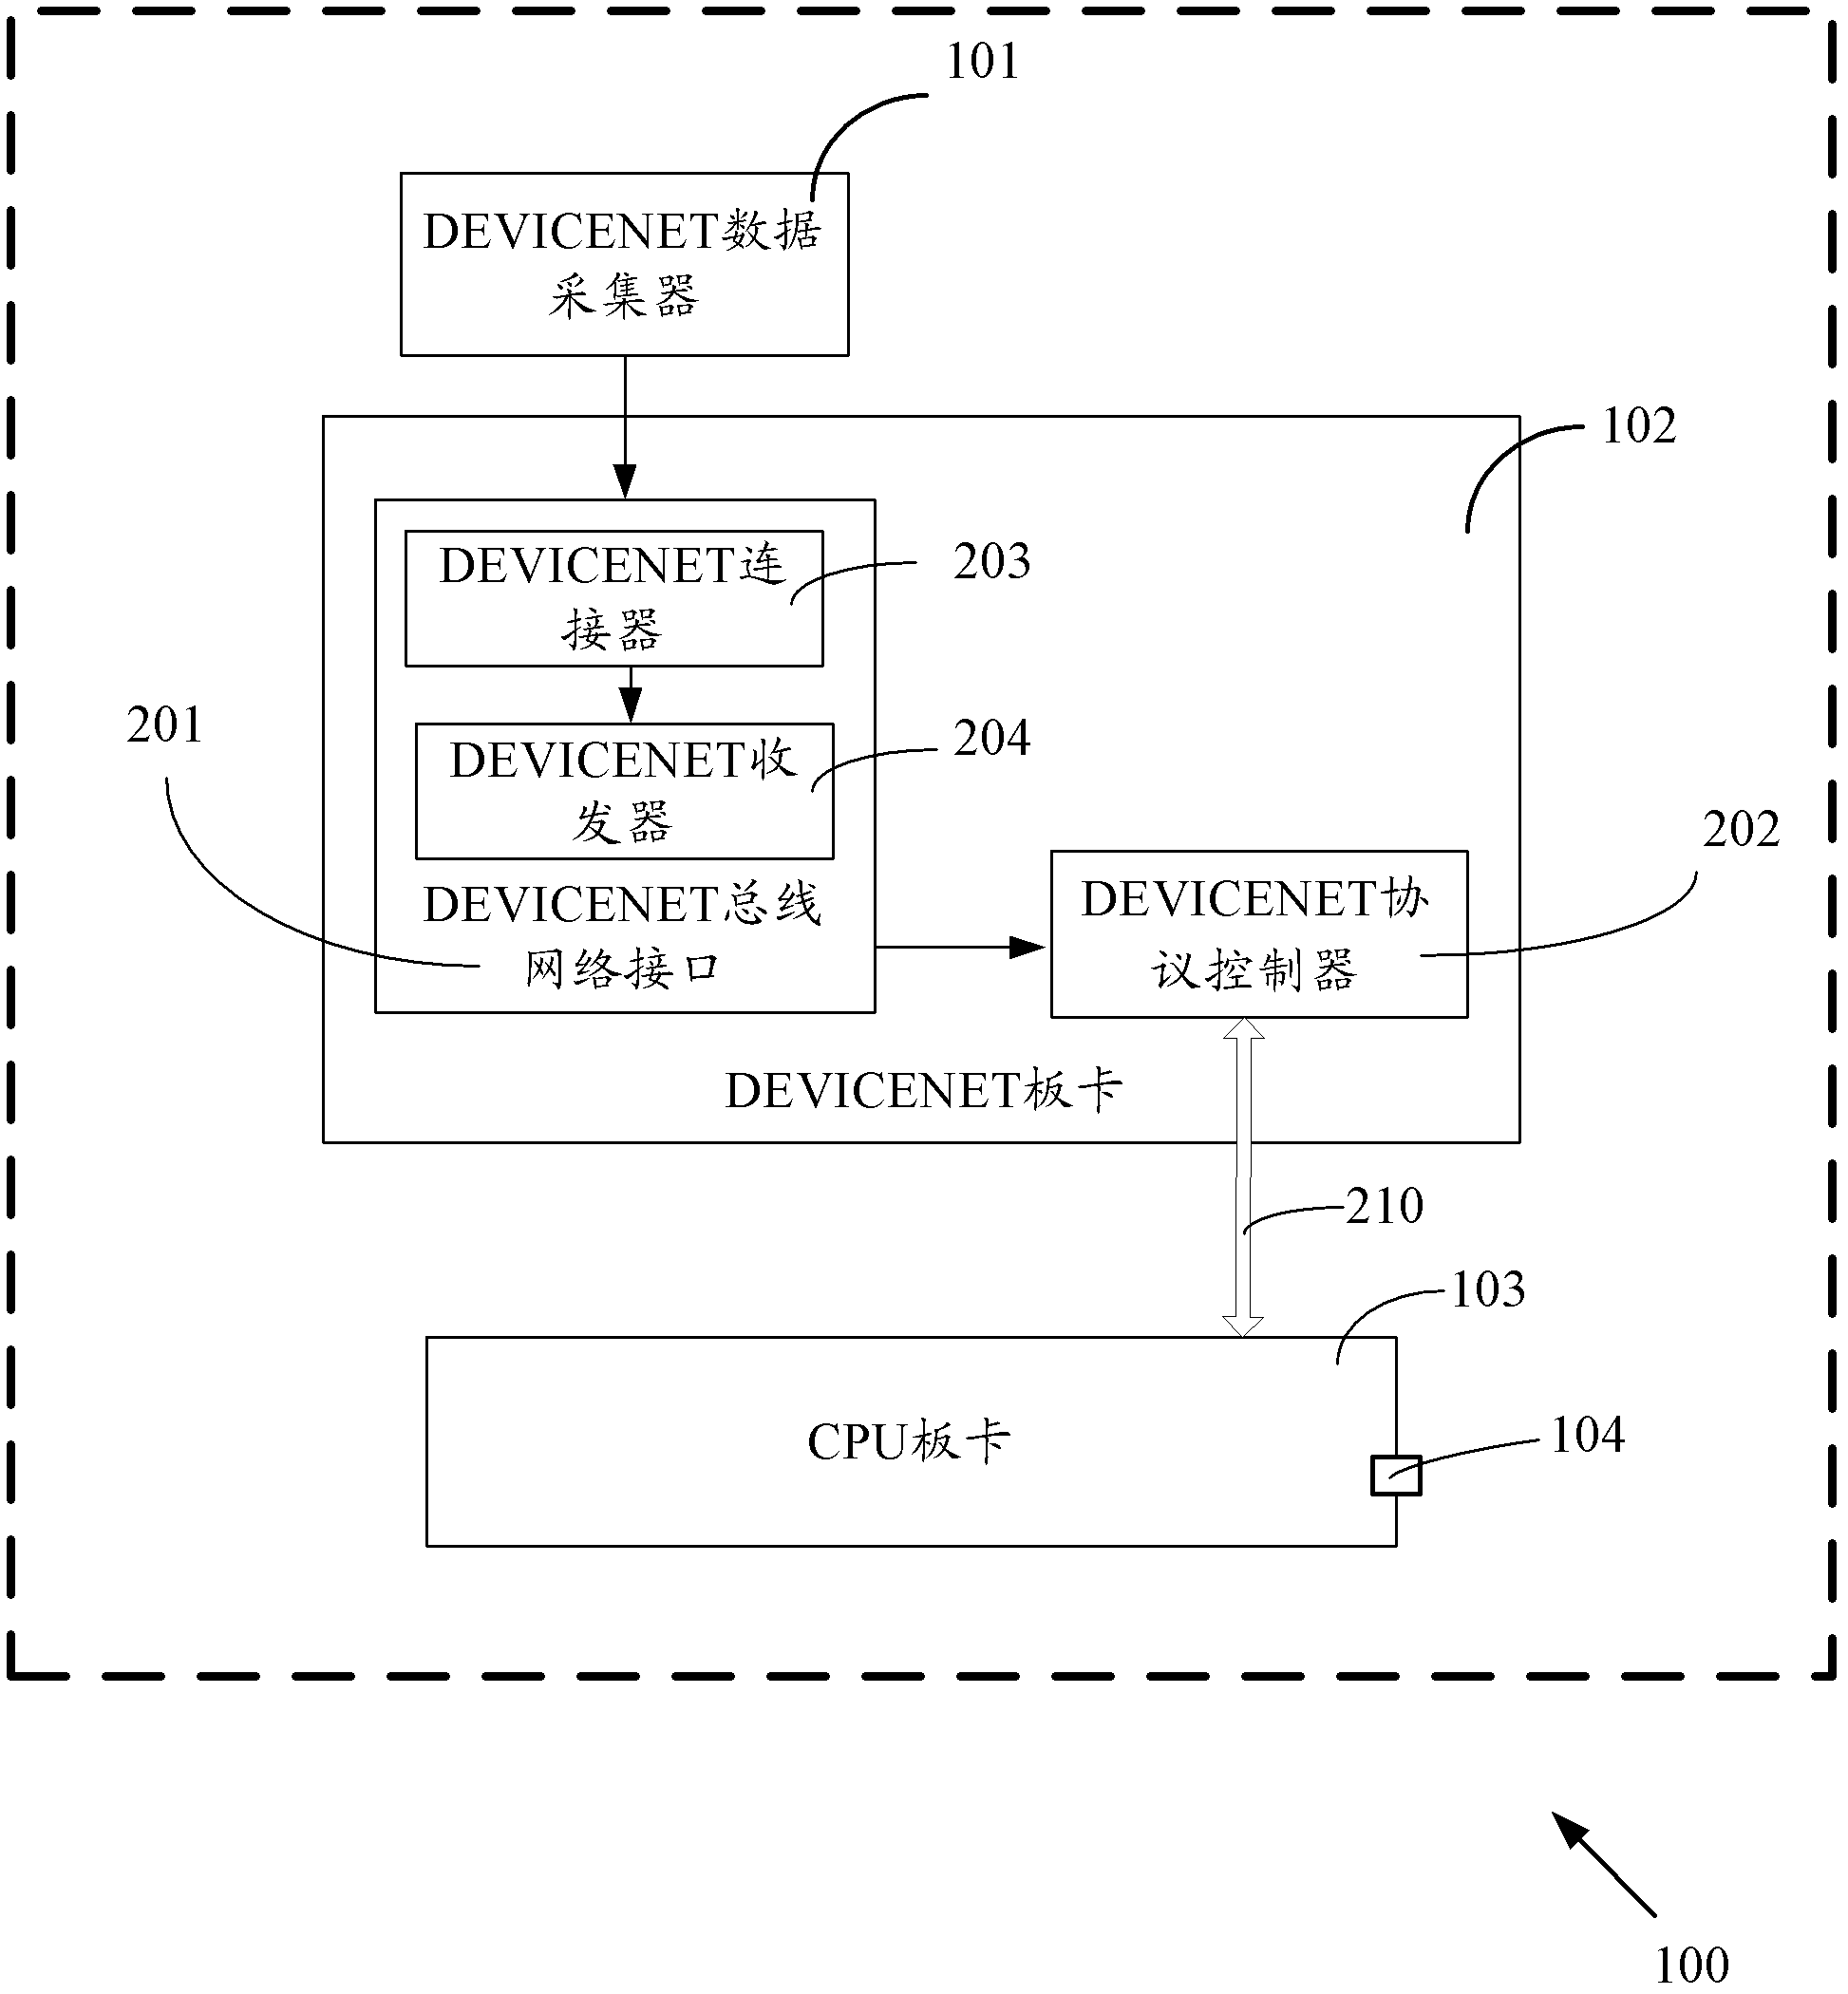 Train fault recording device and method